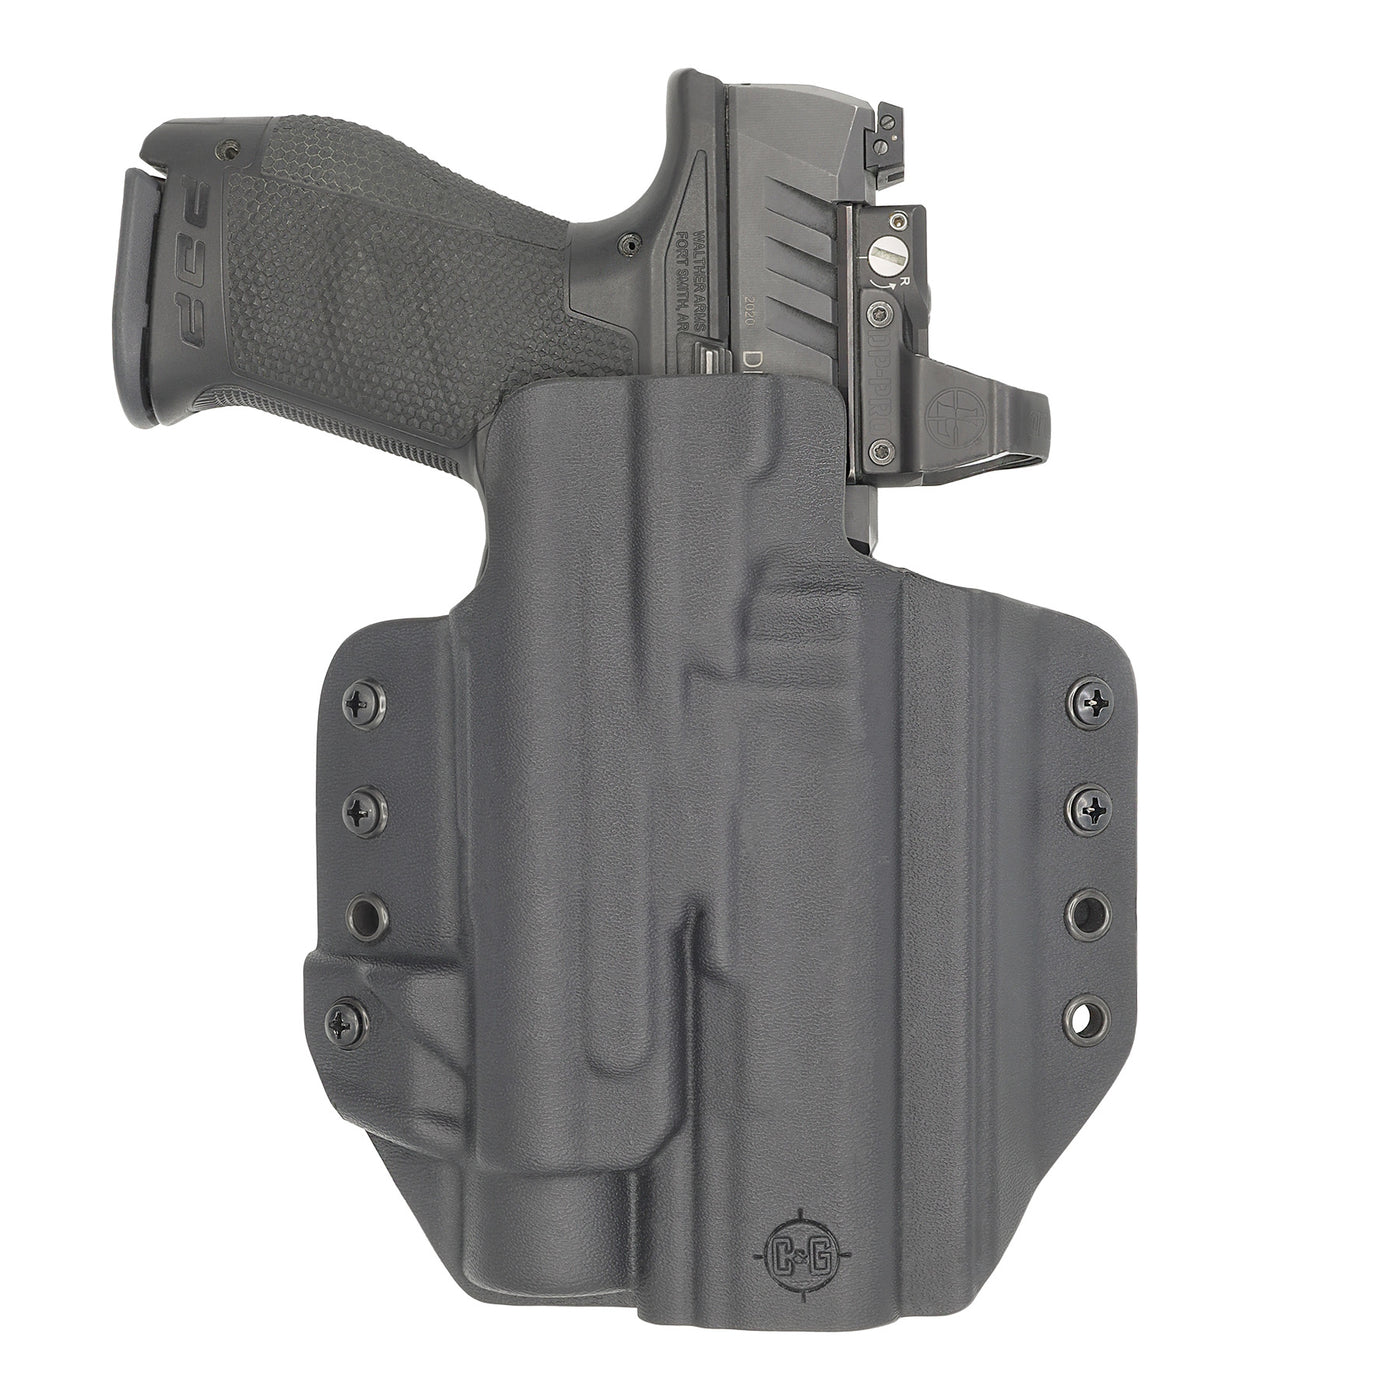 C&G Holsters custom OWB Tactical CZ P07/9 Streamlight TLR1 in holstered position